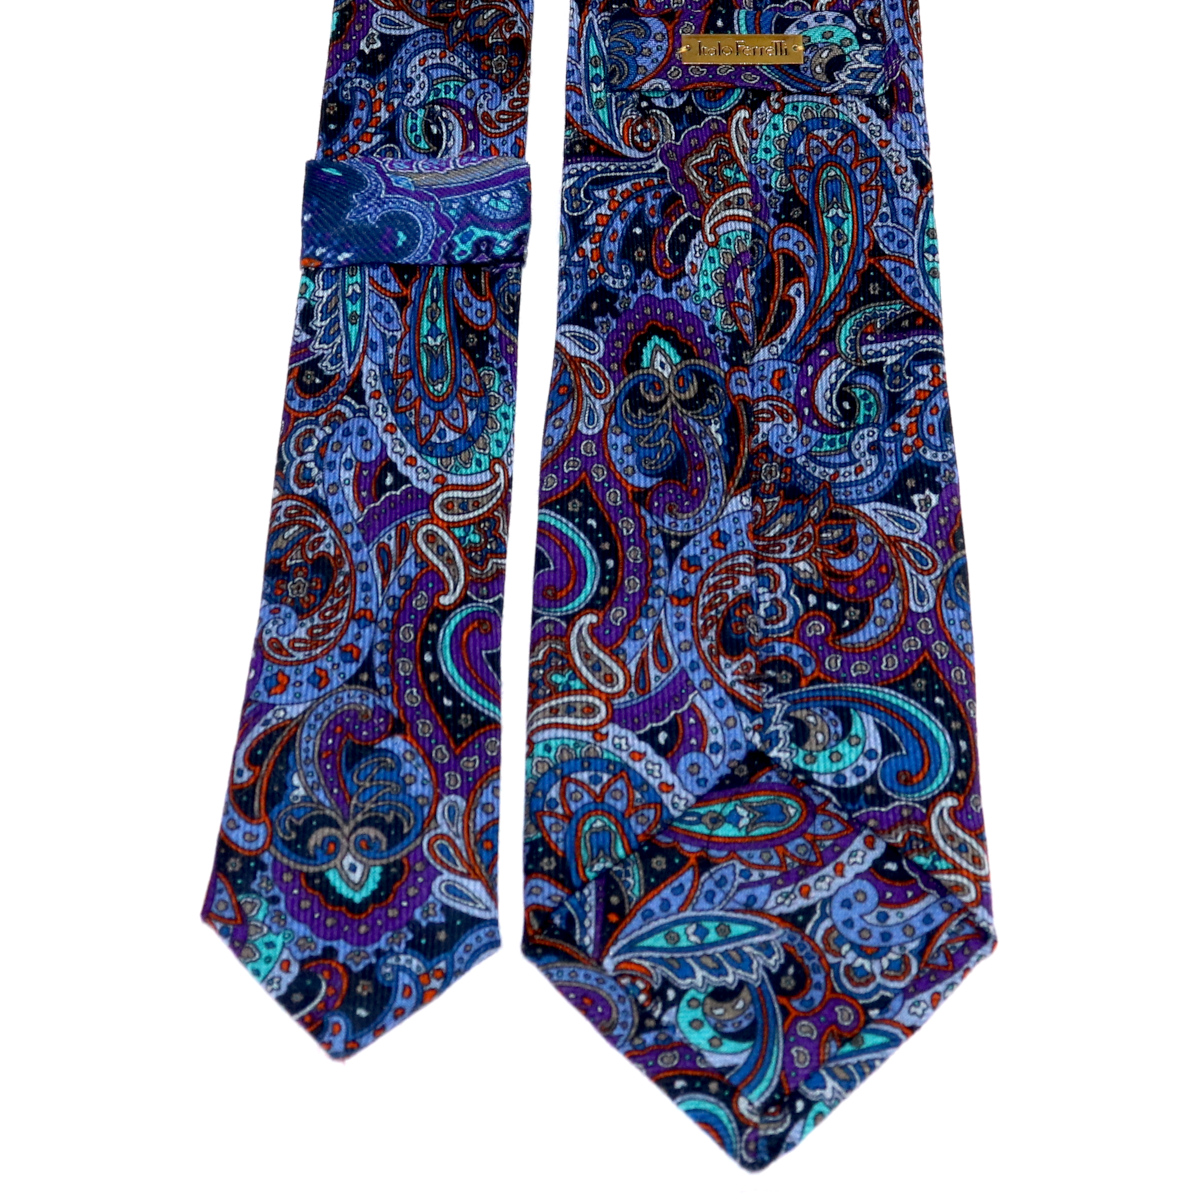 Sartorial cashmere tie, blue and red paisley pattern, handmade in Italy ...